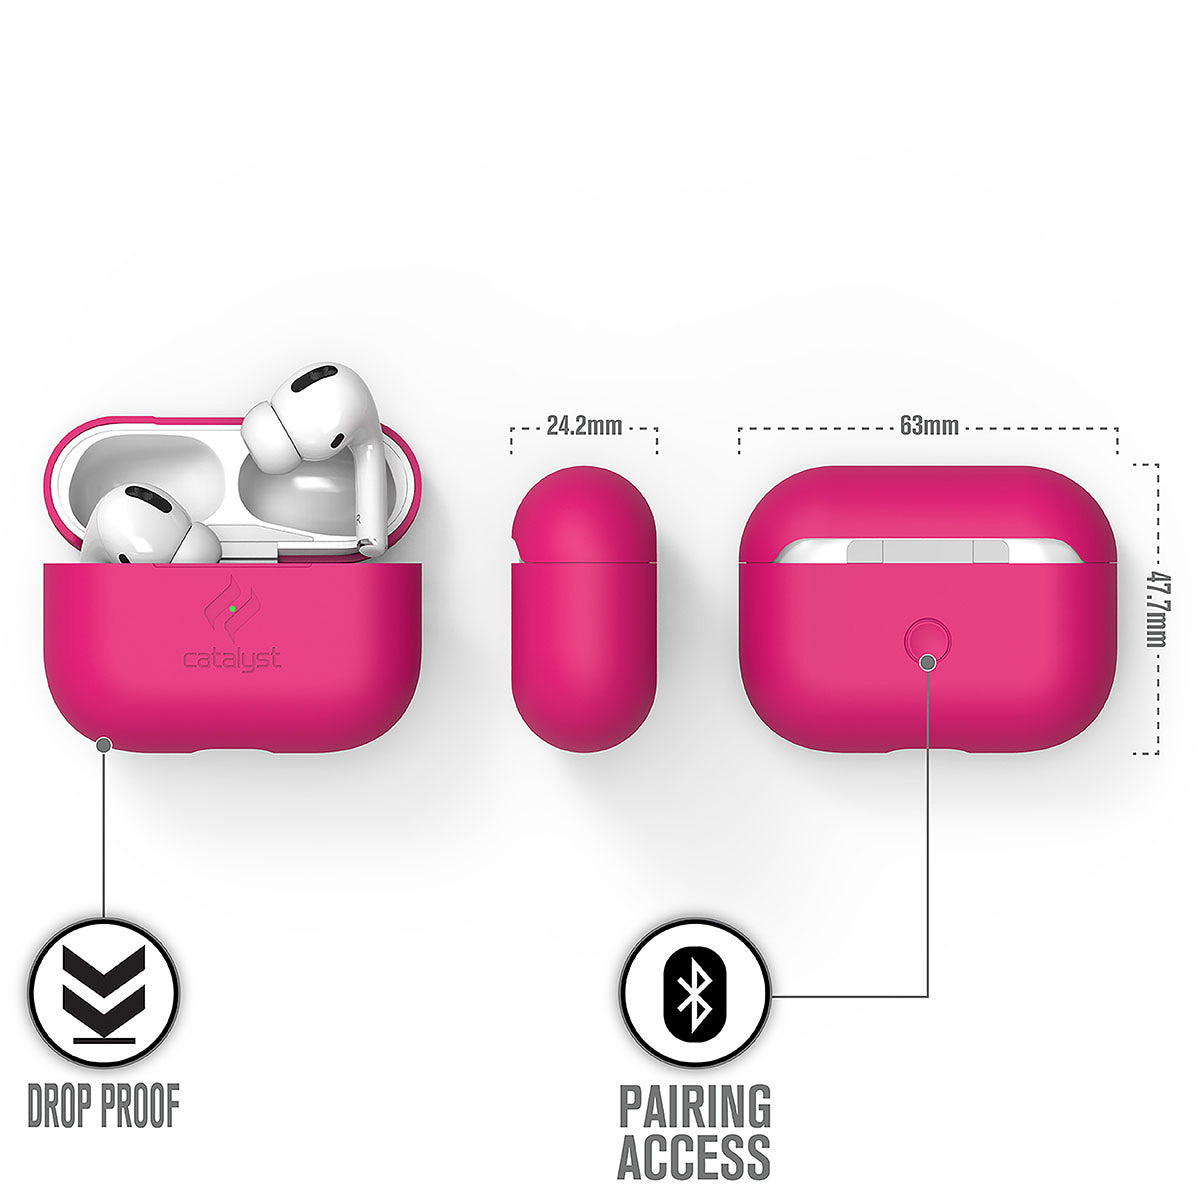 Catalyst airpods pro gen 2/1 slim case showing the case dimensions in a neon pink colorway text reads drop proof pairing access